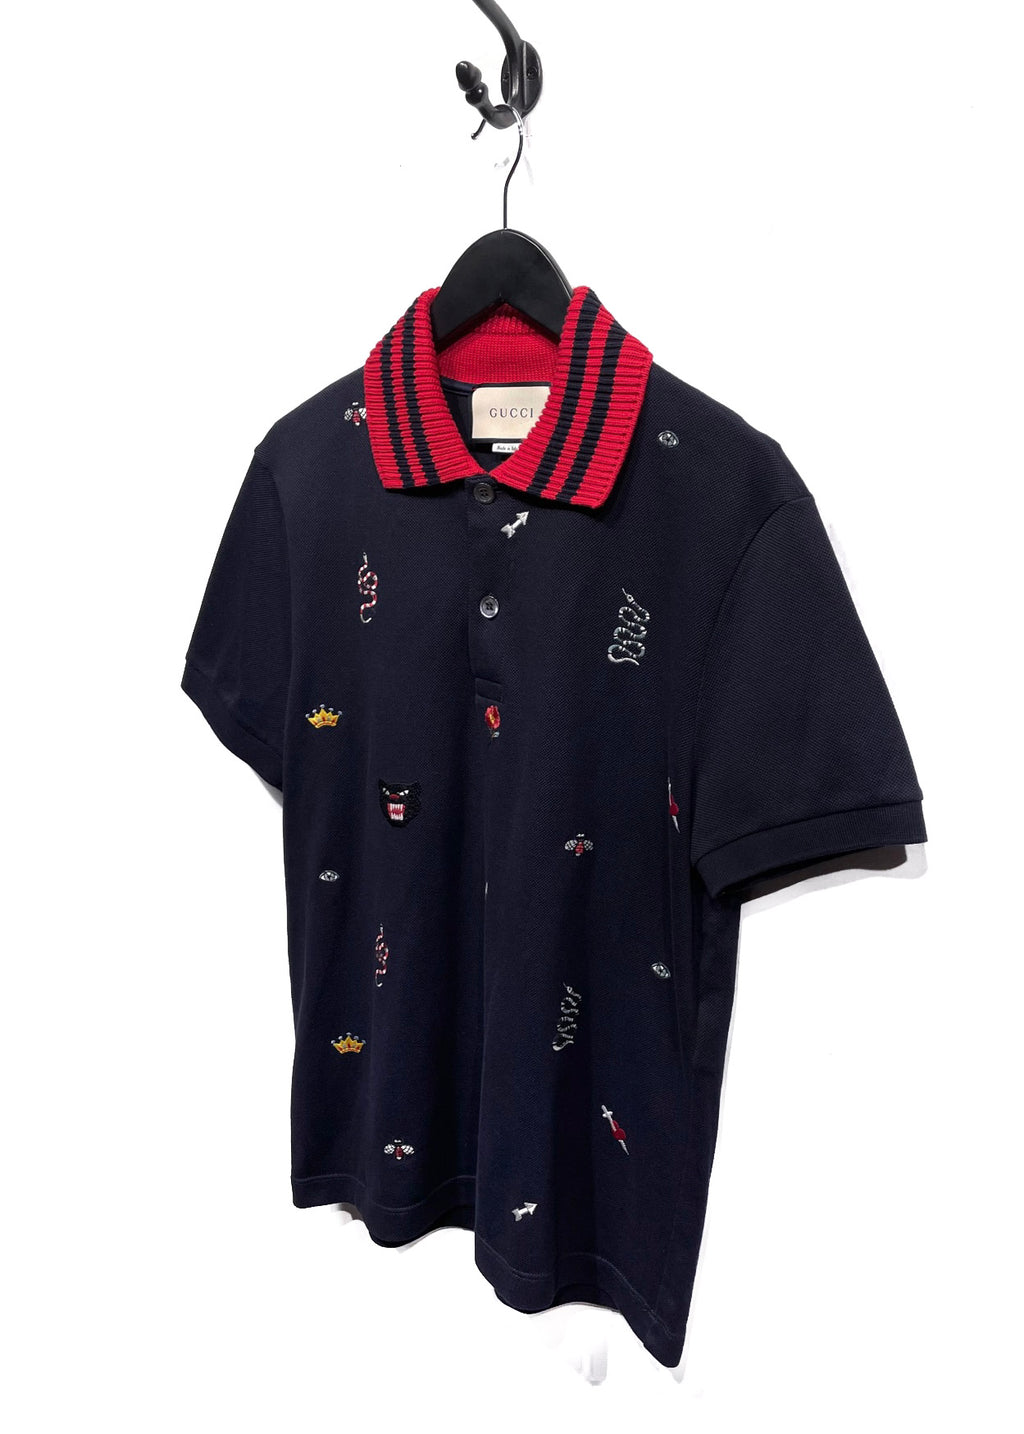 Gucci 2018 Navy Polo with Multi Embroideries